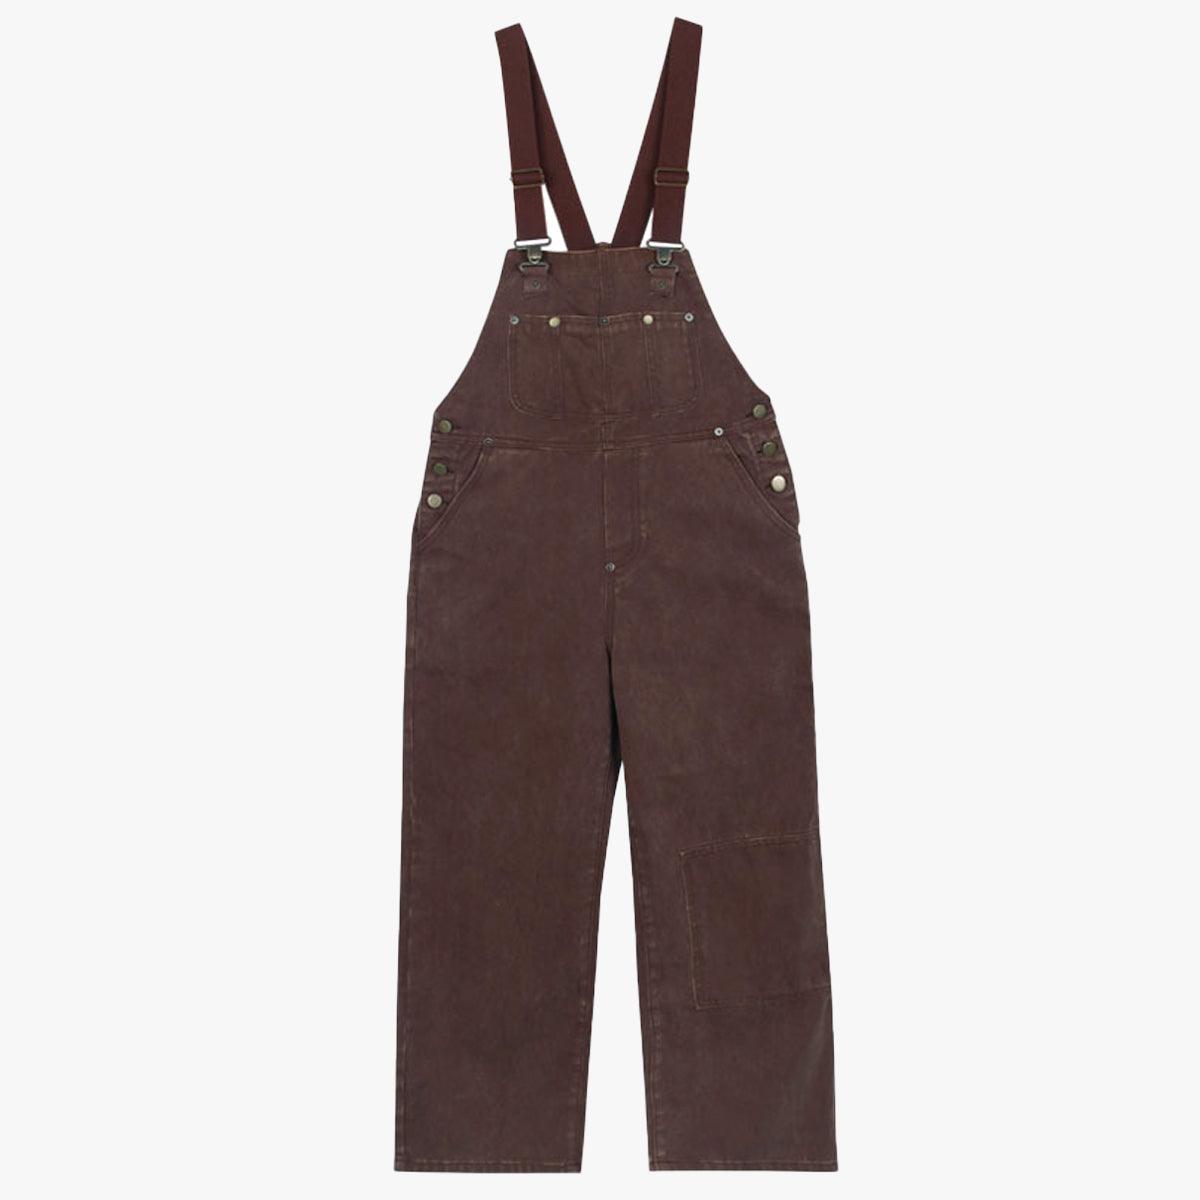 Earth Brown Indie Denim Overall Jumpsuit - Aesthetic Clothes Shop